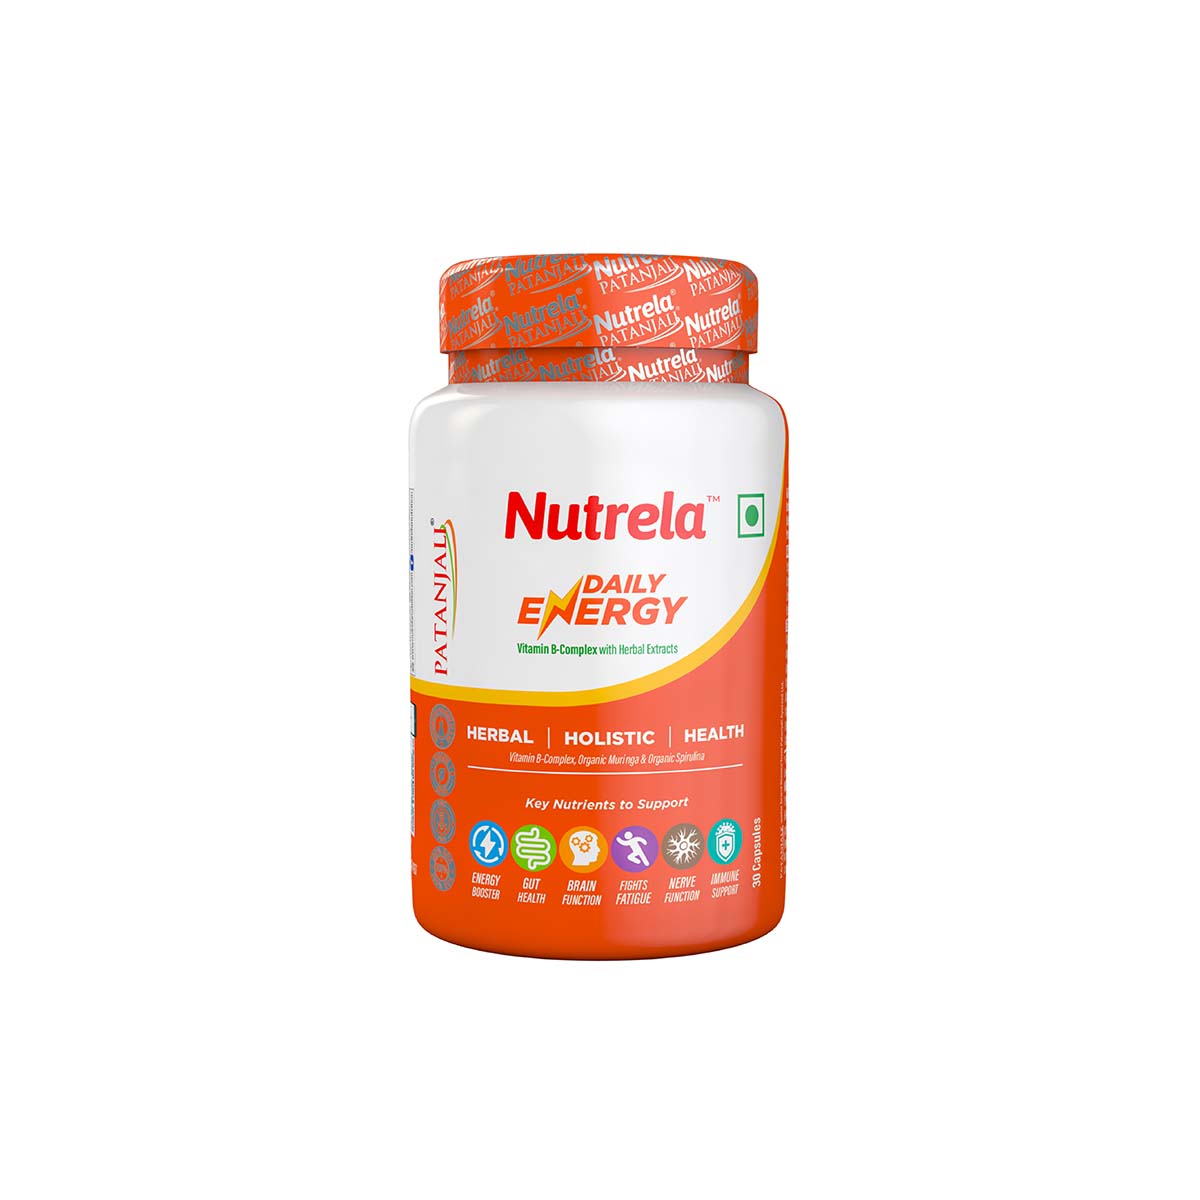 Picture of Patanjali Nutrela Daily Energy Capsules - 30 Capsules